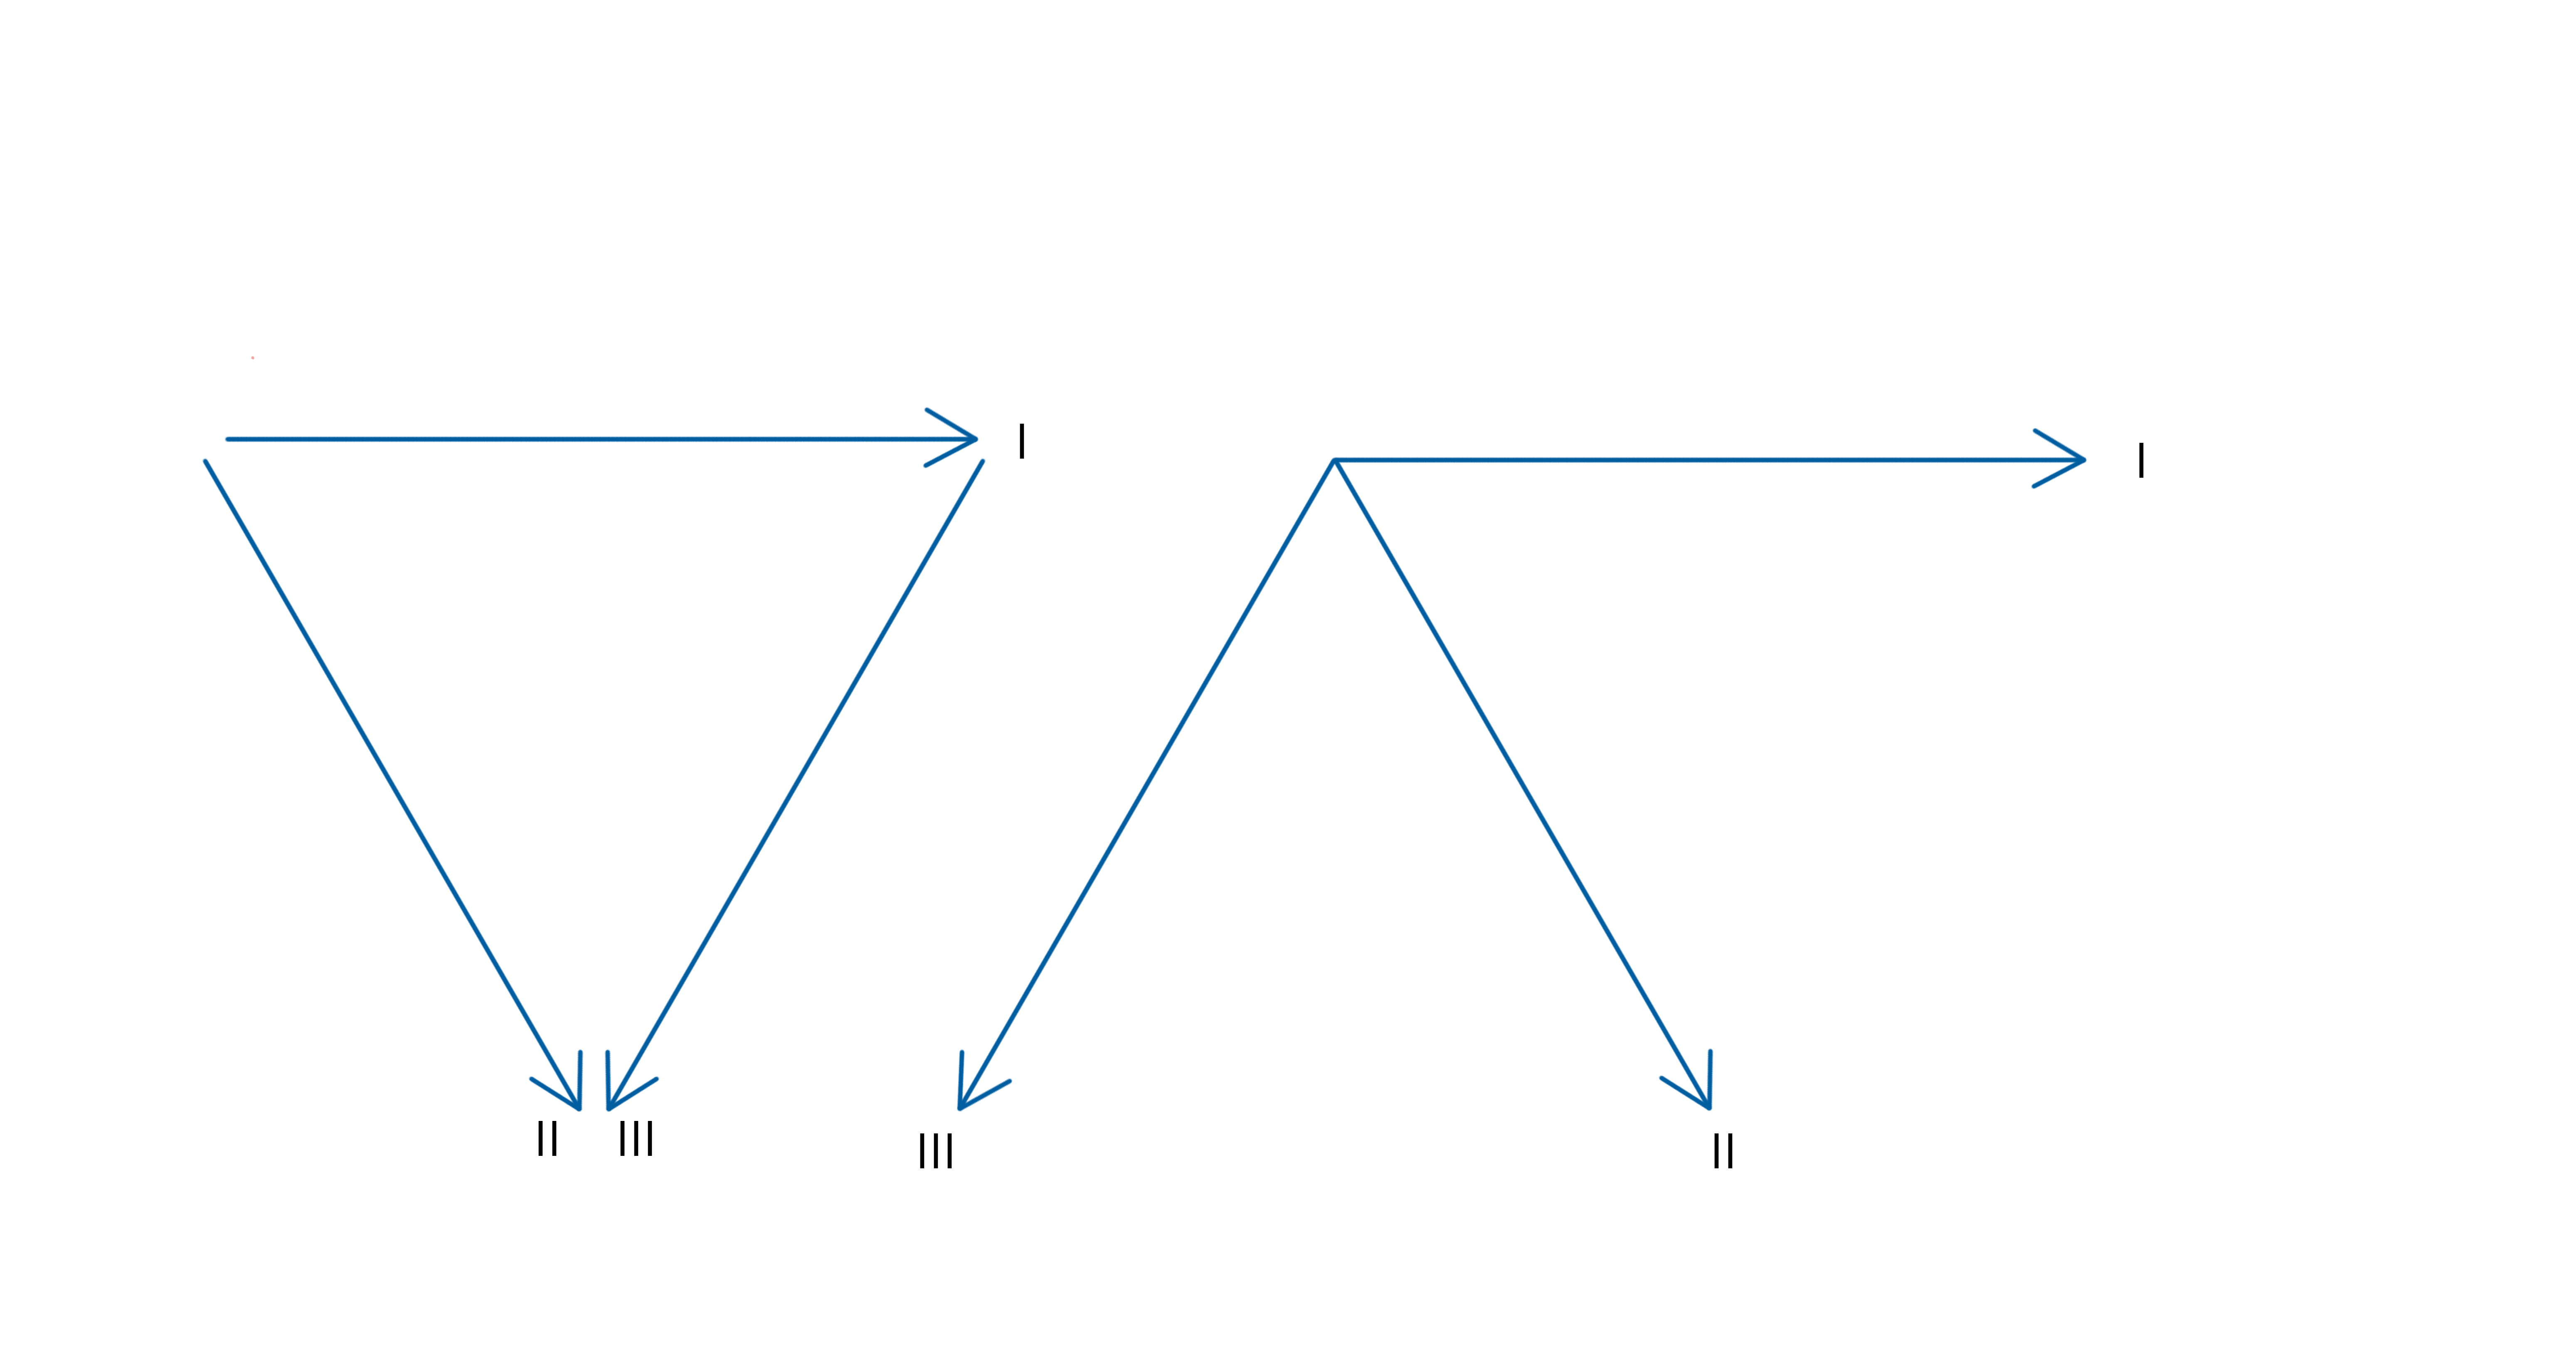 Diagram of Einthoven’s Triangle with leads I, II and III